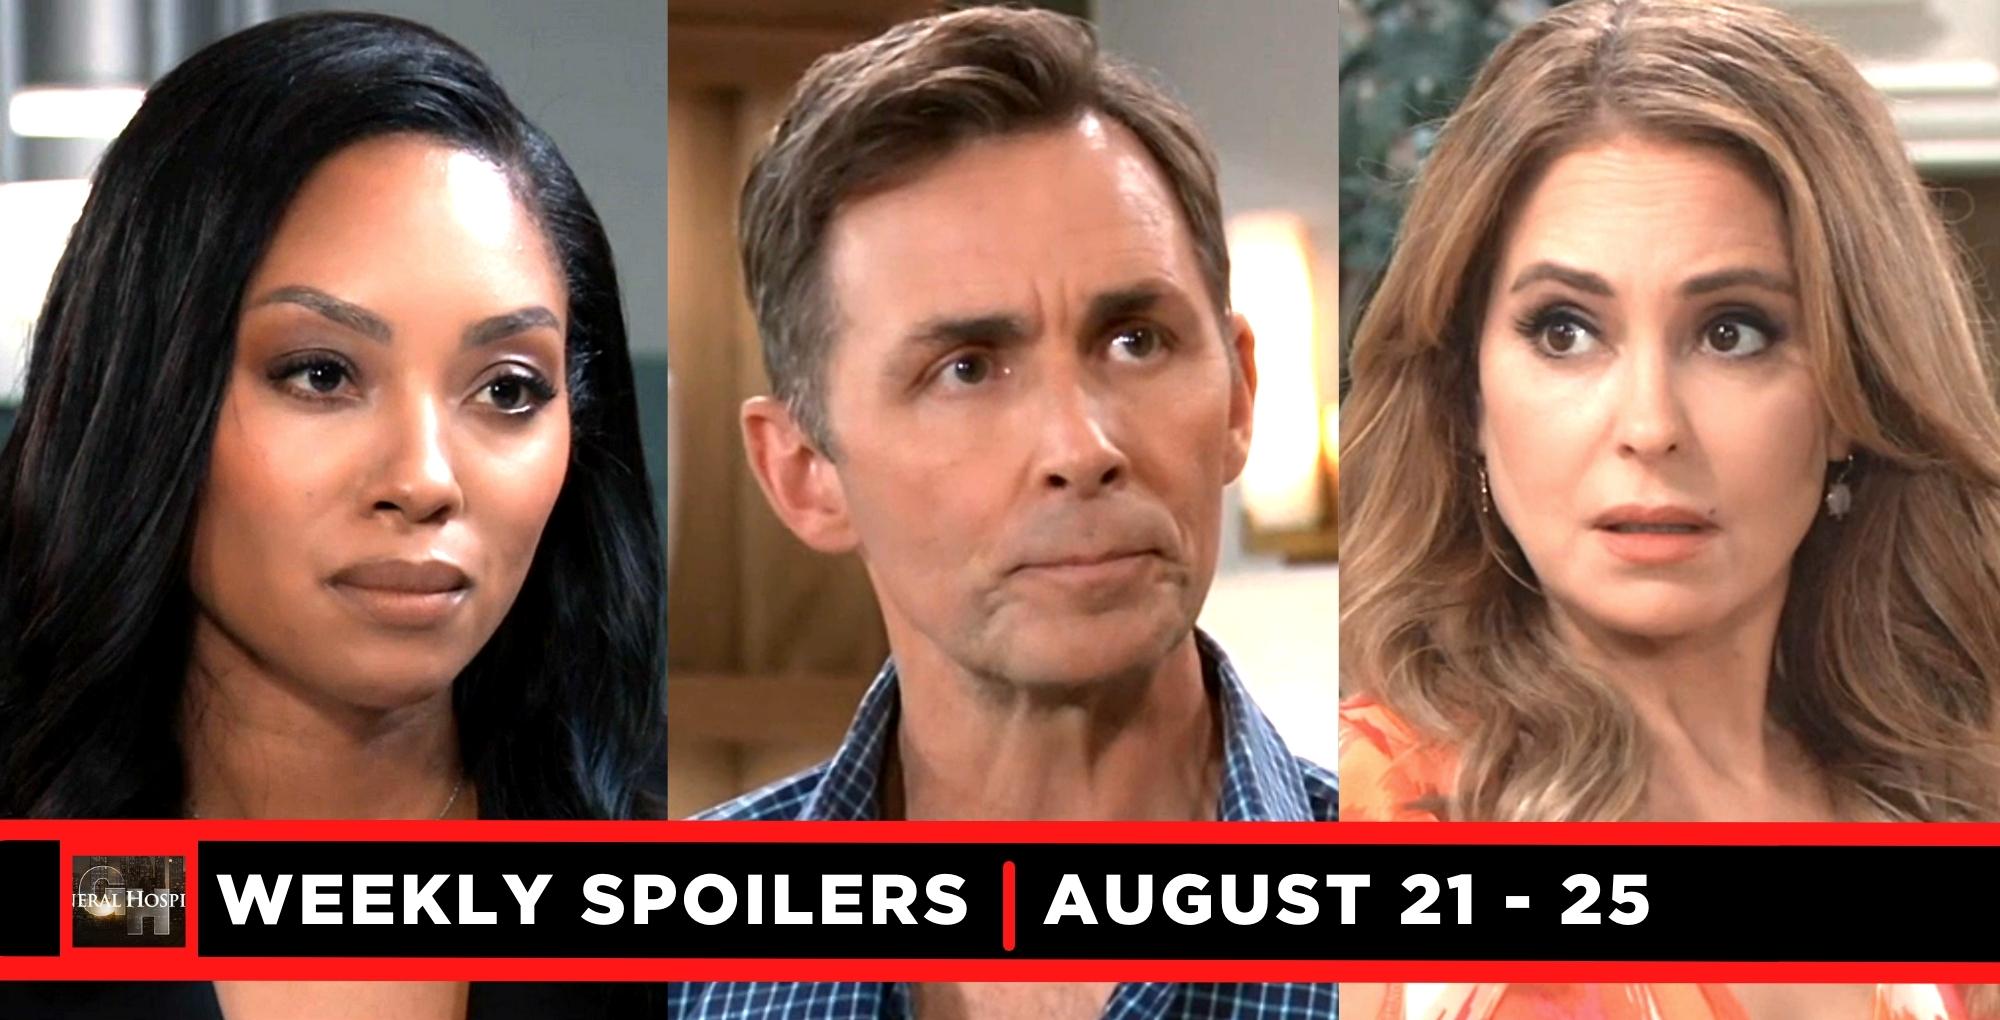 general hospital spoilers for august 21 – august 25, 2023, three images jordan, valentin, and olivia.